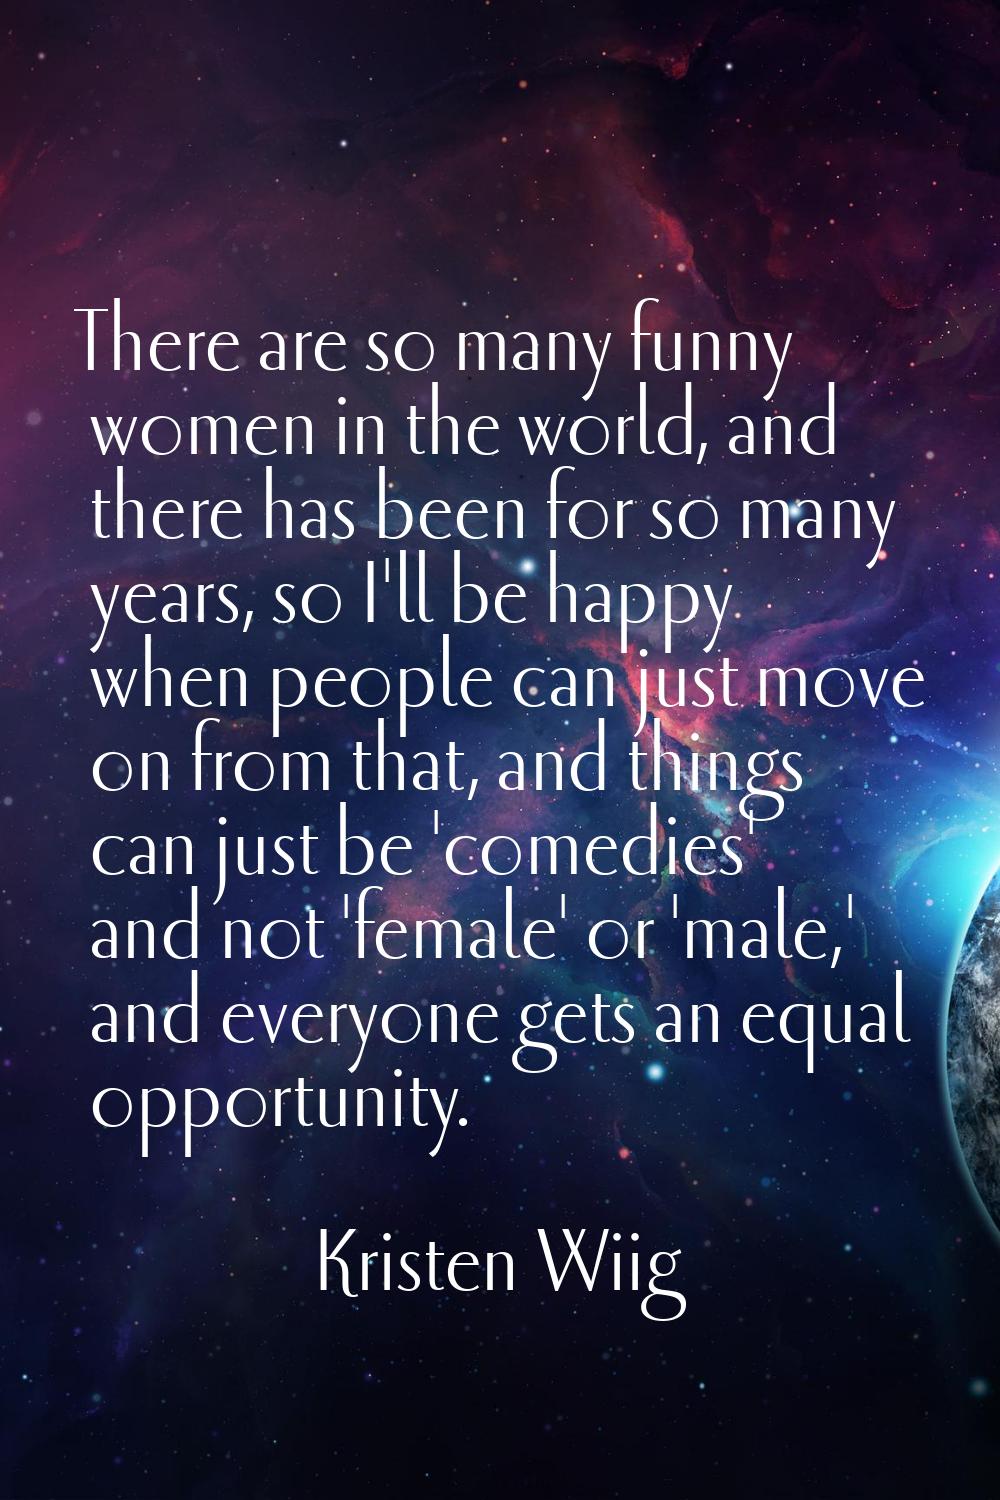 There are so many funny women in the world, and there has been for so many years, so I'll be happy 